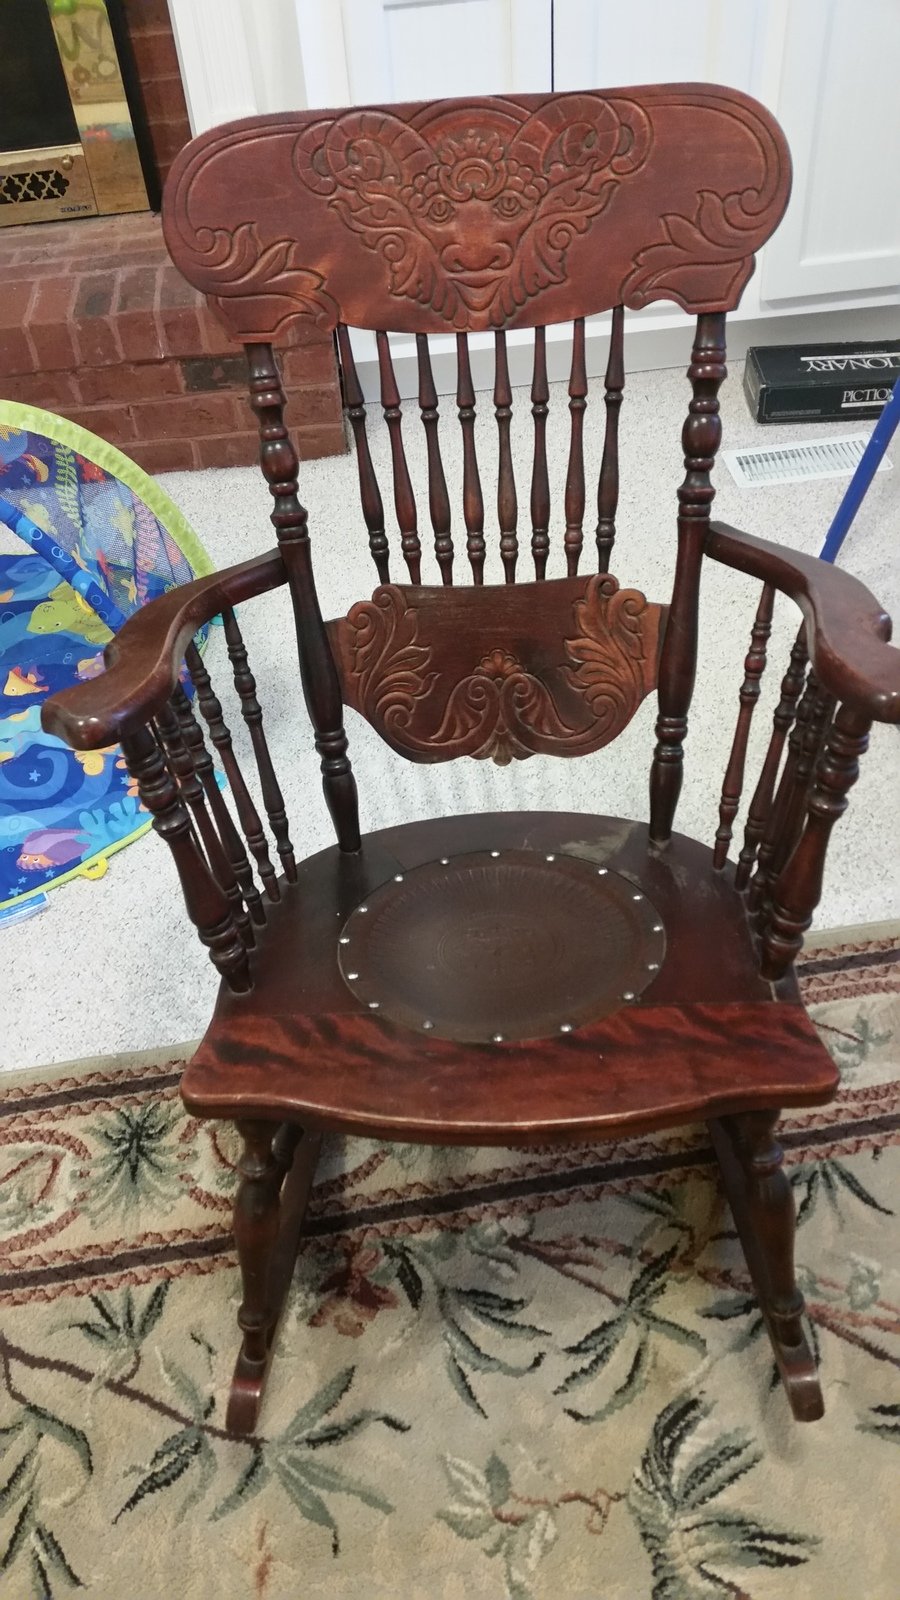 Styles Of Rocking Chairs - nydatadesign